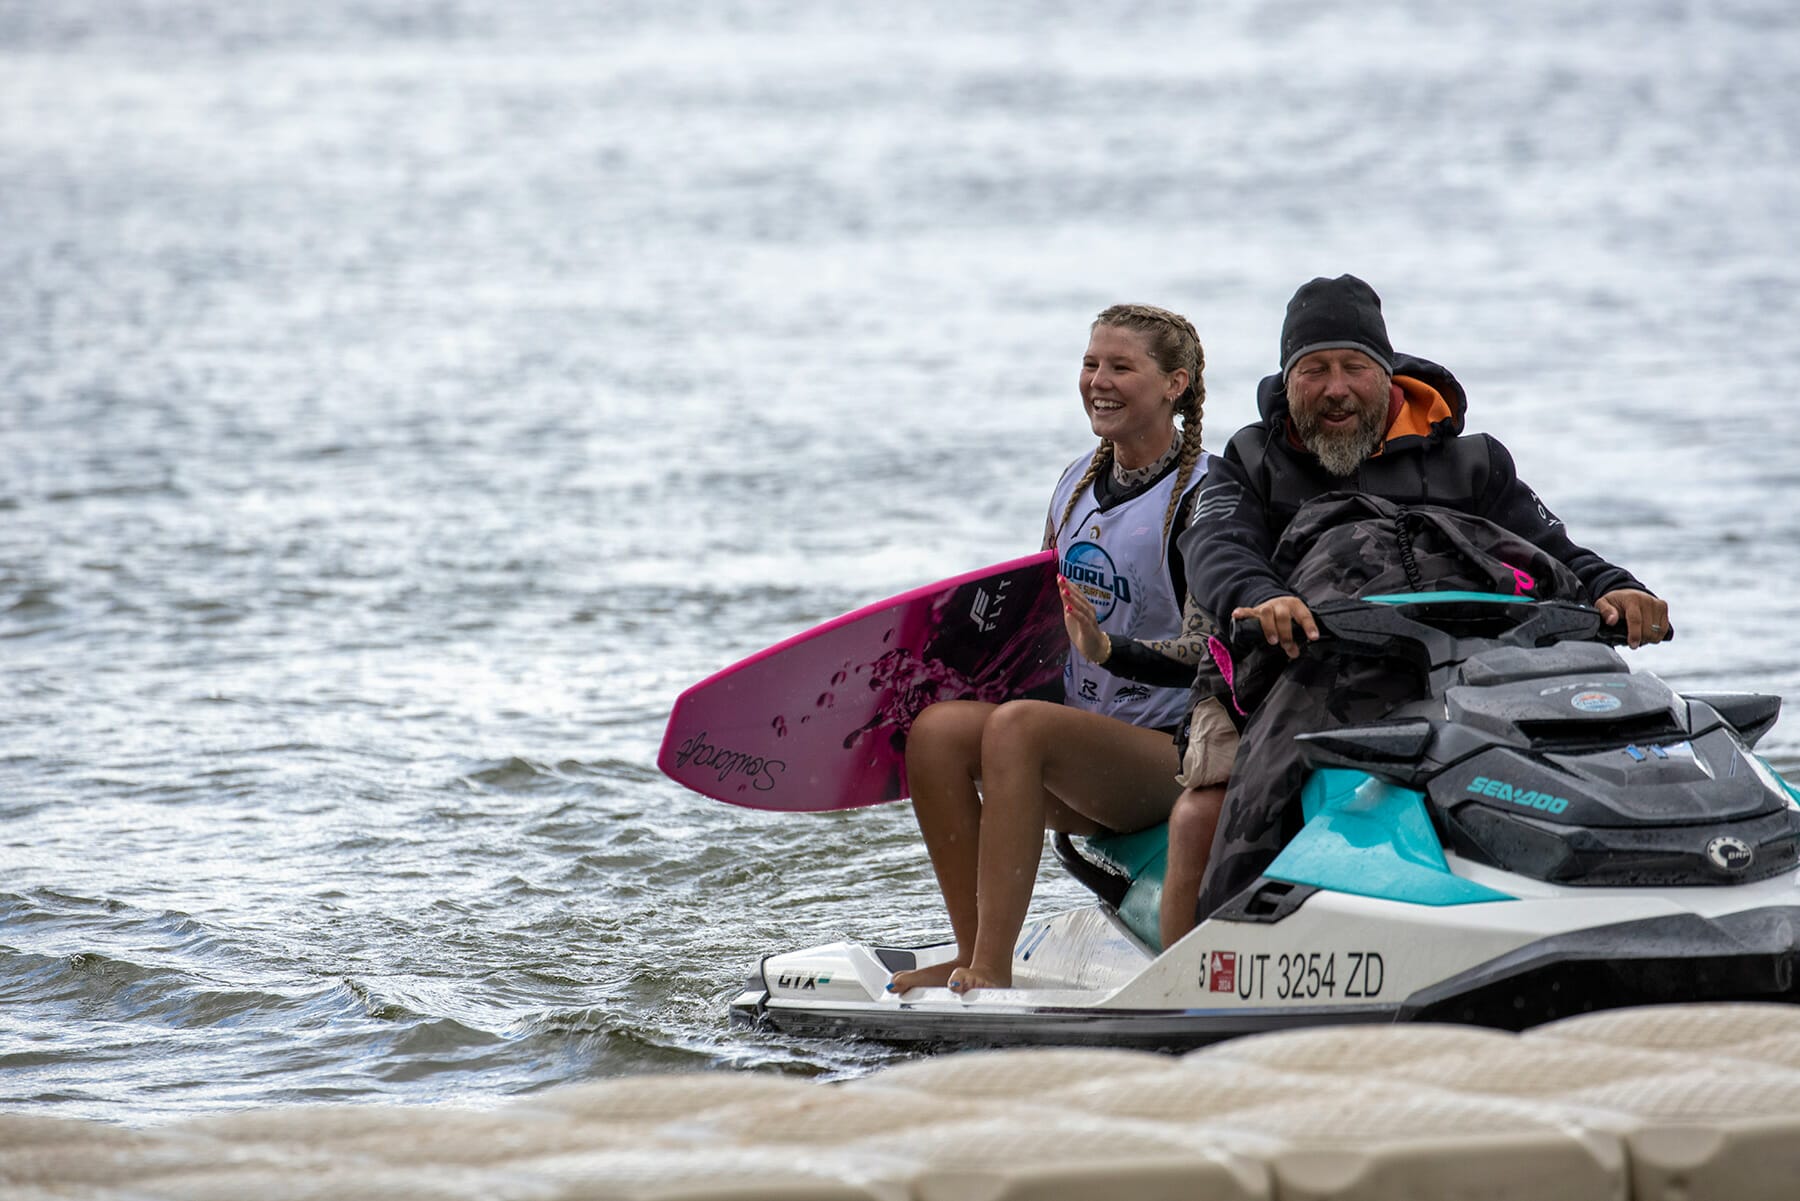 A man and woman riding a jet ski in the water.